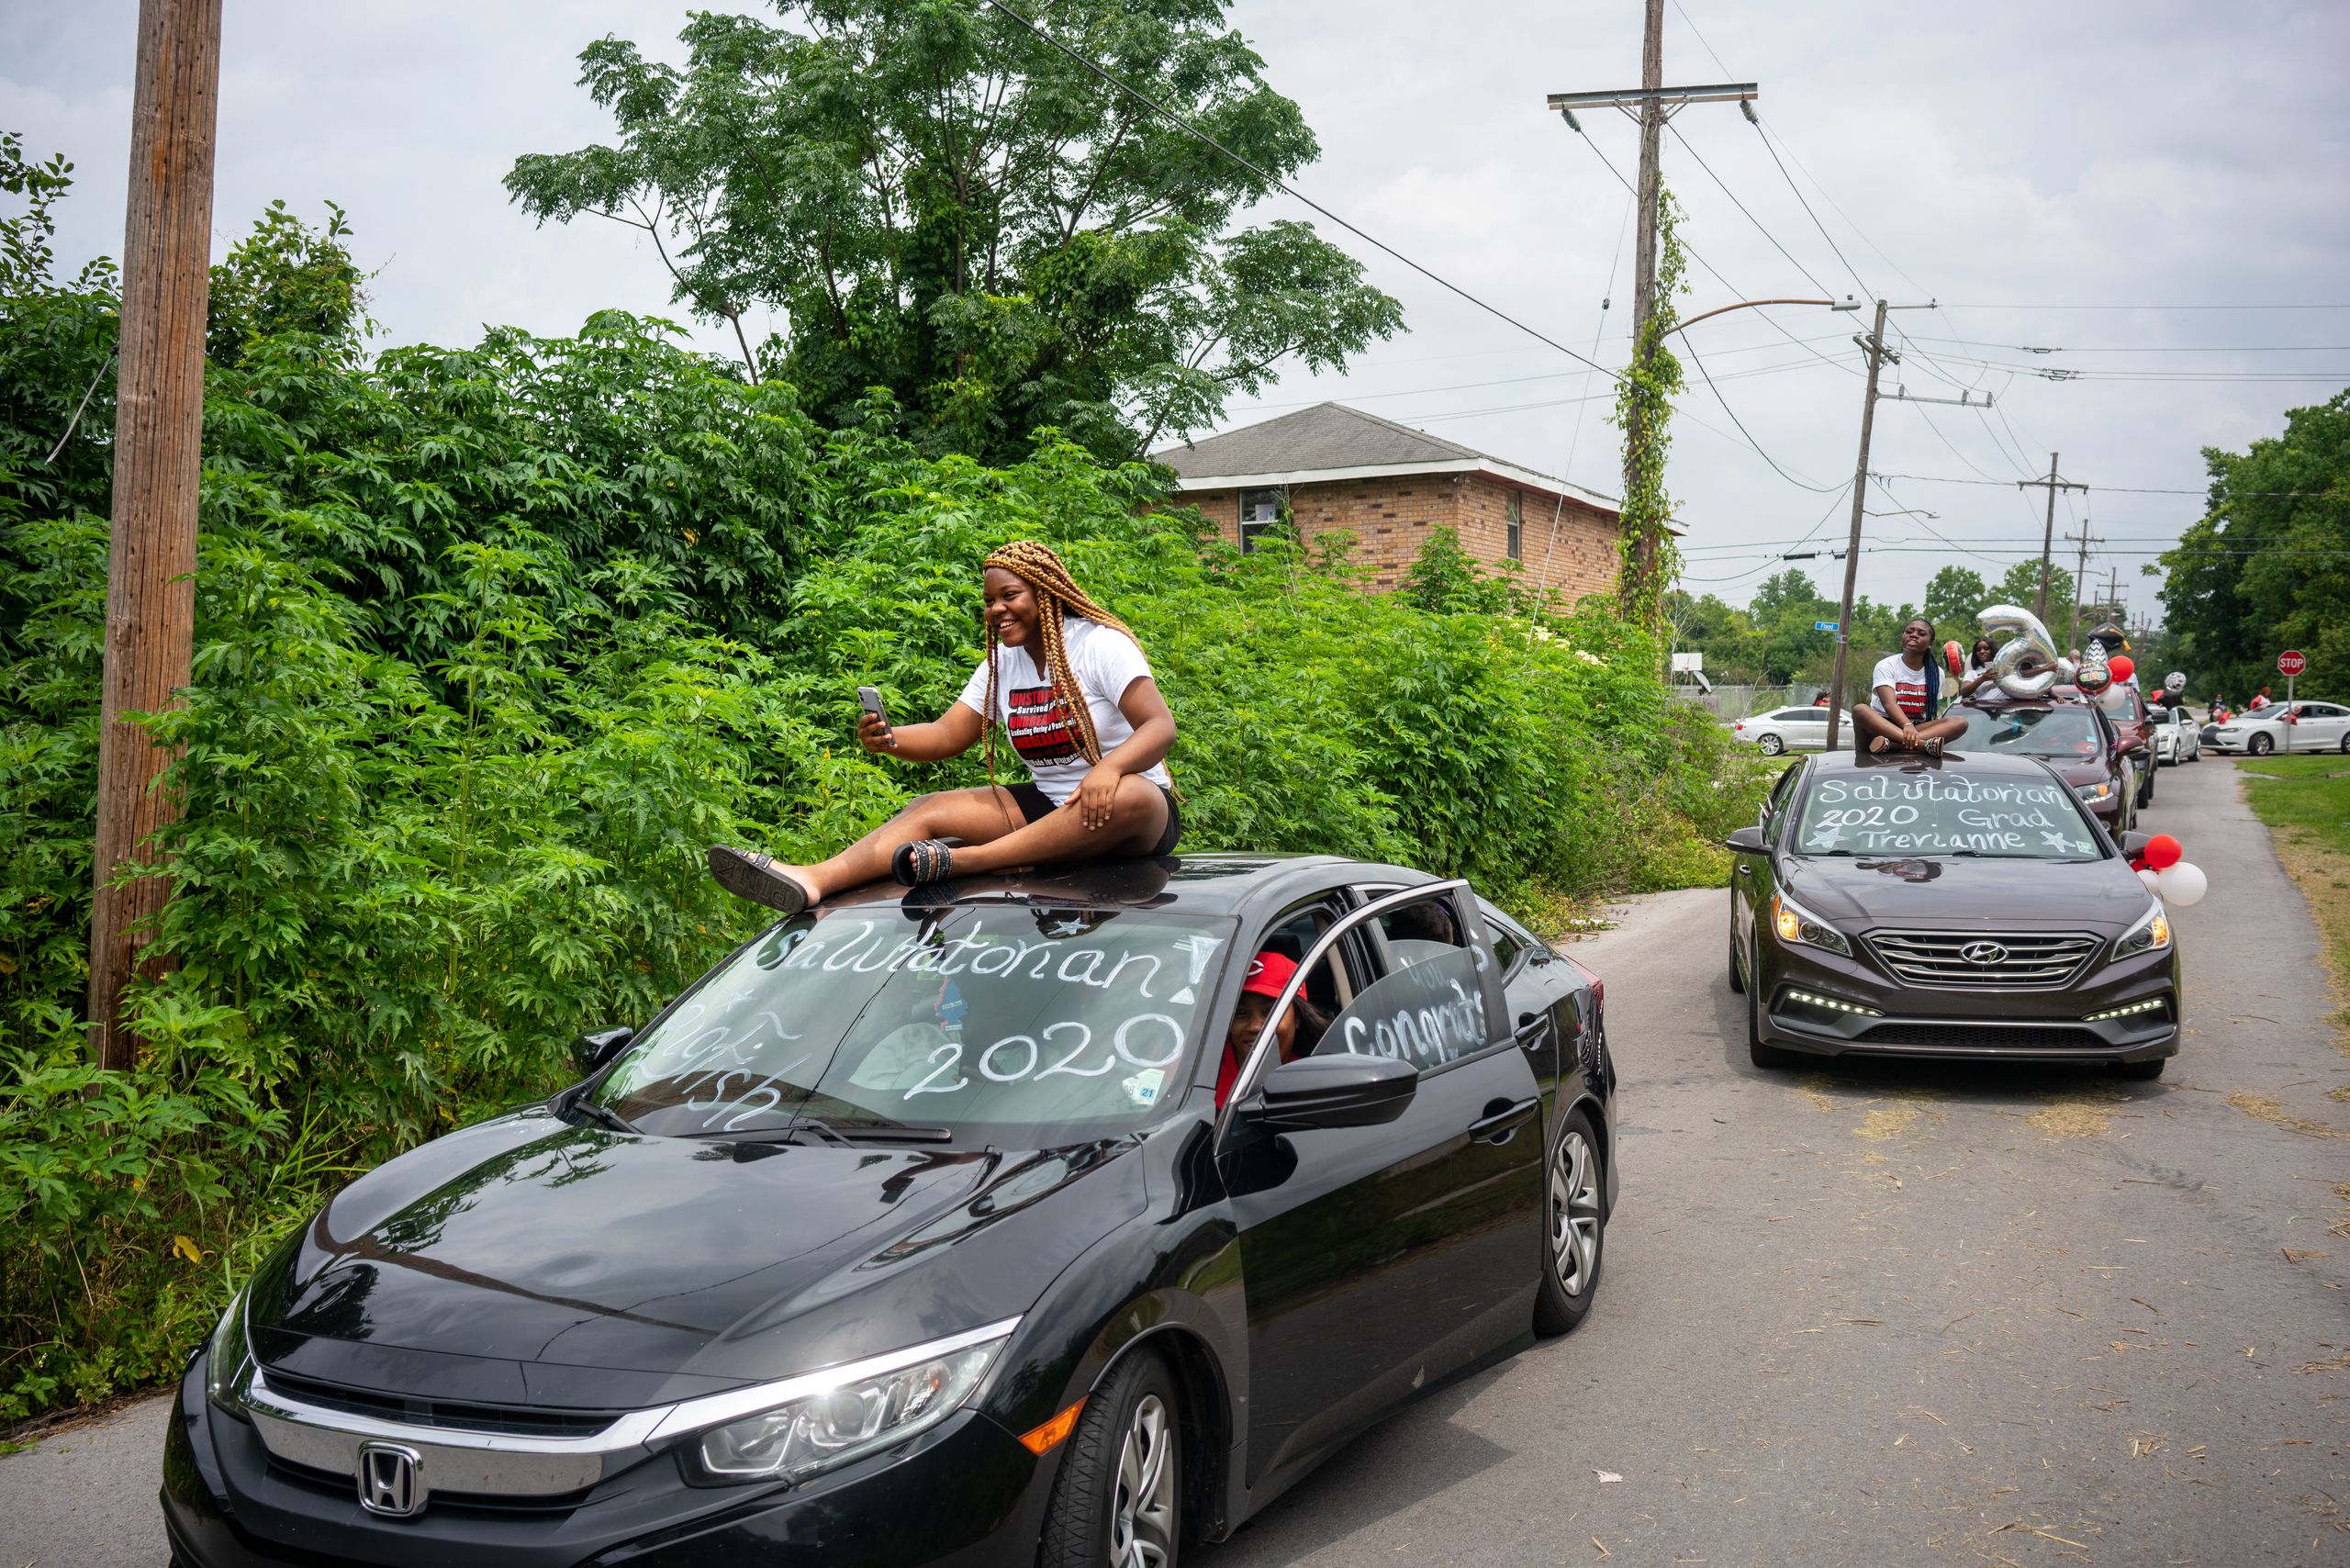 Trevianne Turner rides on top of her sister's car during a Dr. Martin Luther King Jr. High School graduation parade through t